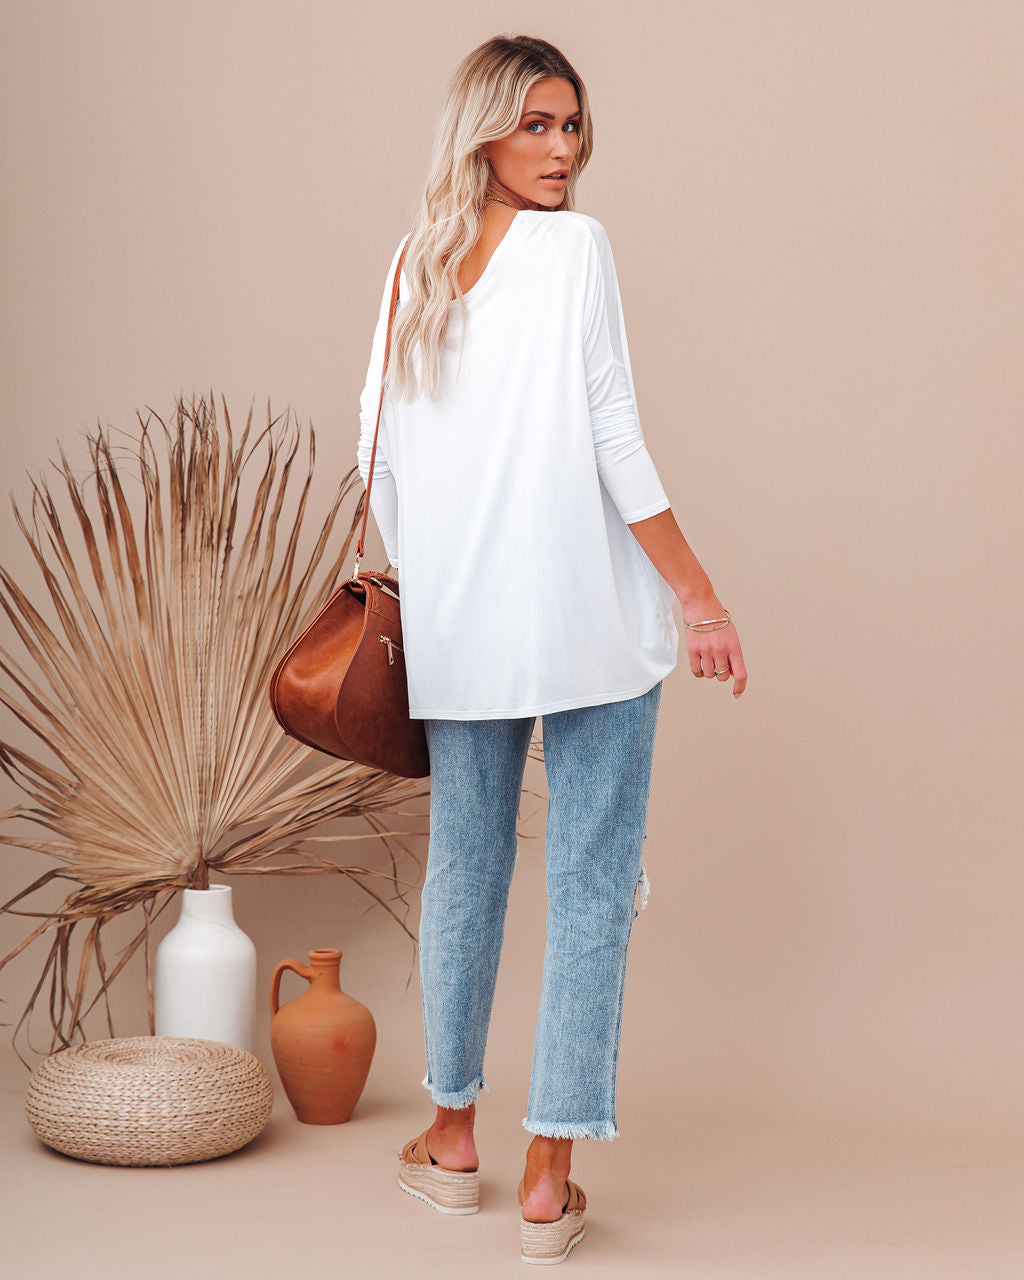 Wear It Well Long Sleeve Bamboo Knit Top - White